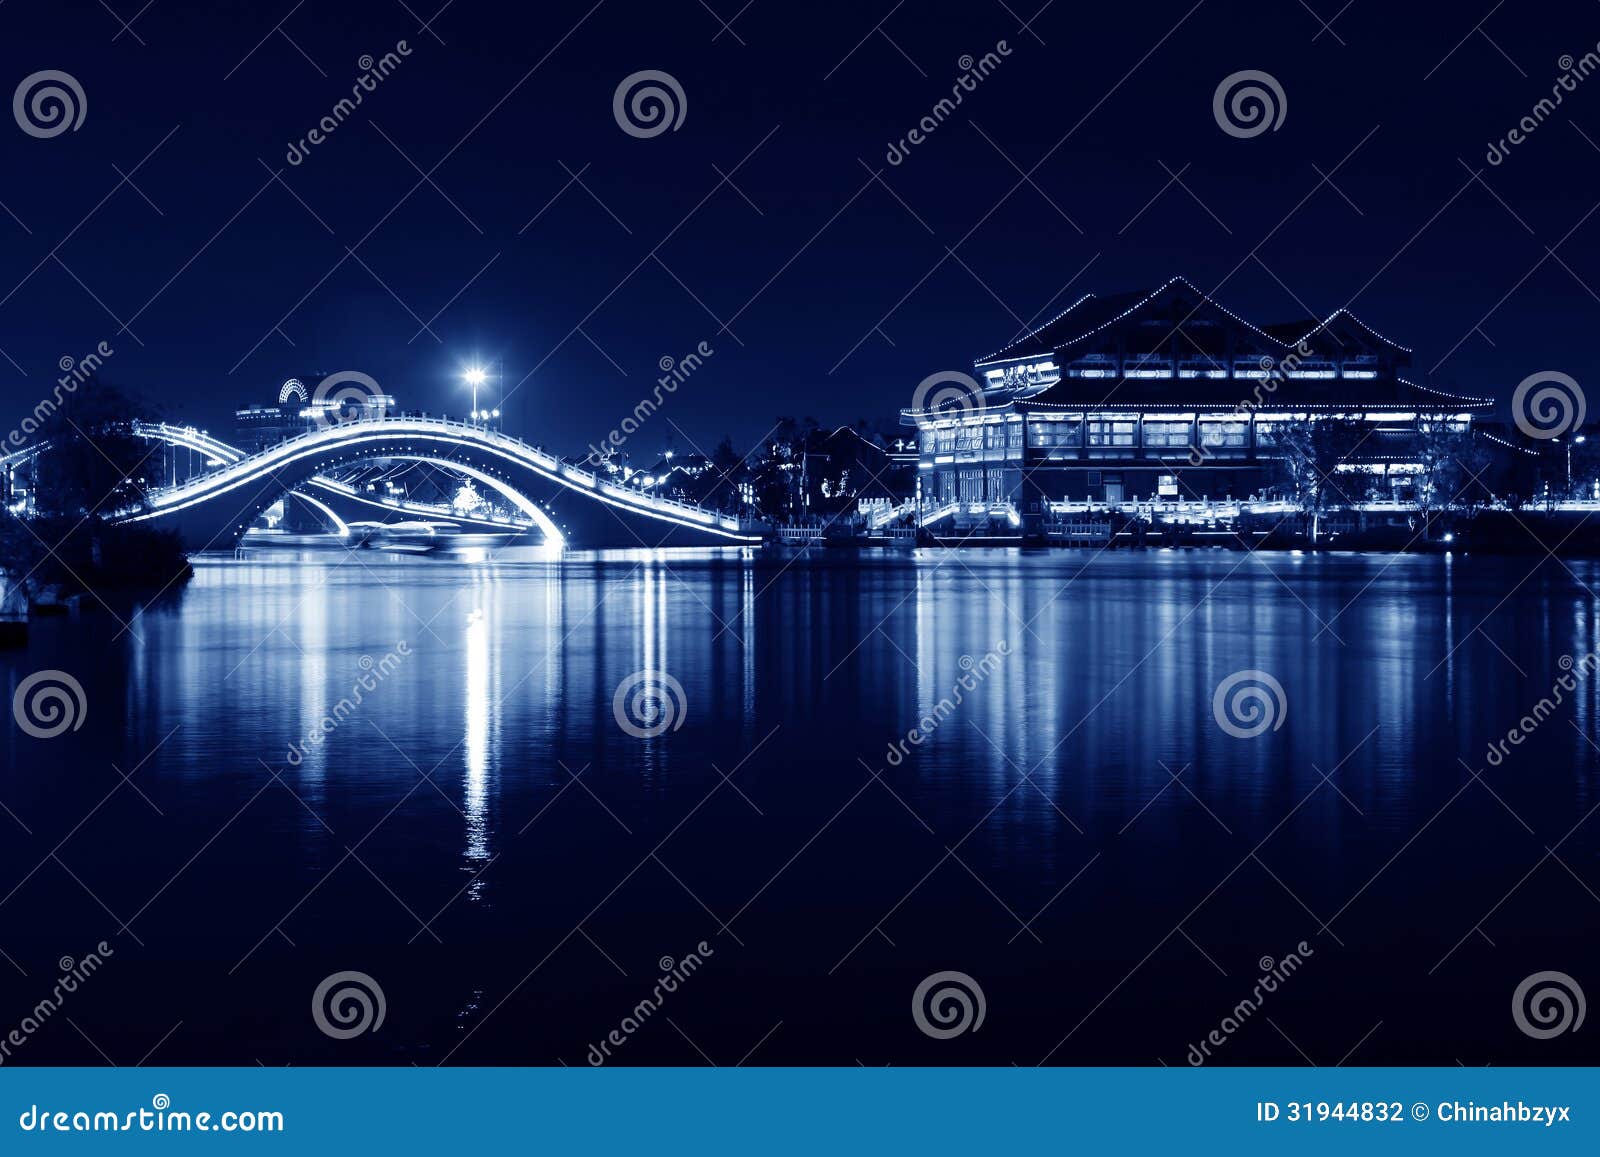 FENGNAN - MAY 11: Architecture landscape at night in a park in a park in HuiFeng Lake Park on May 11, 2013, Fengnan, Hebei Province, China.